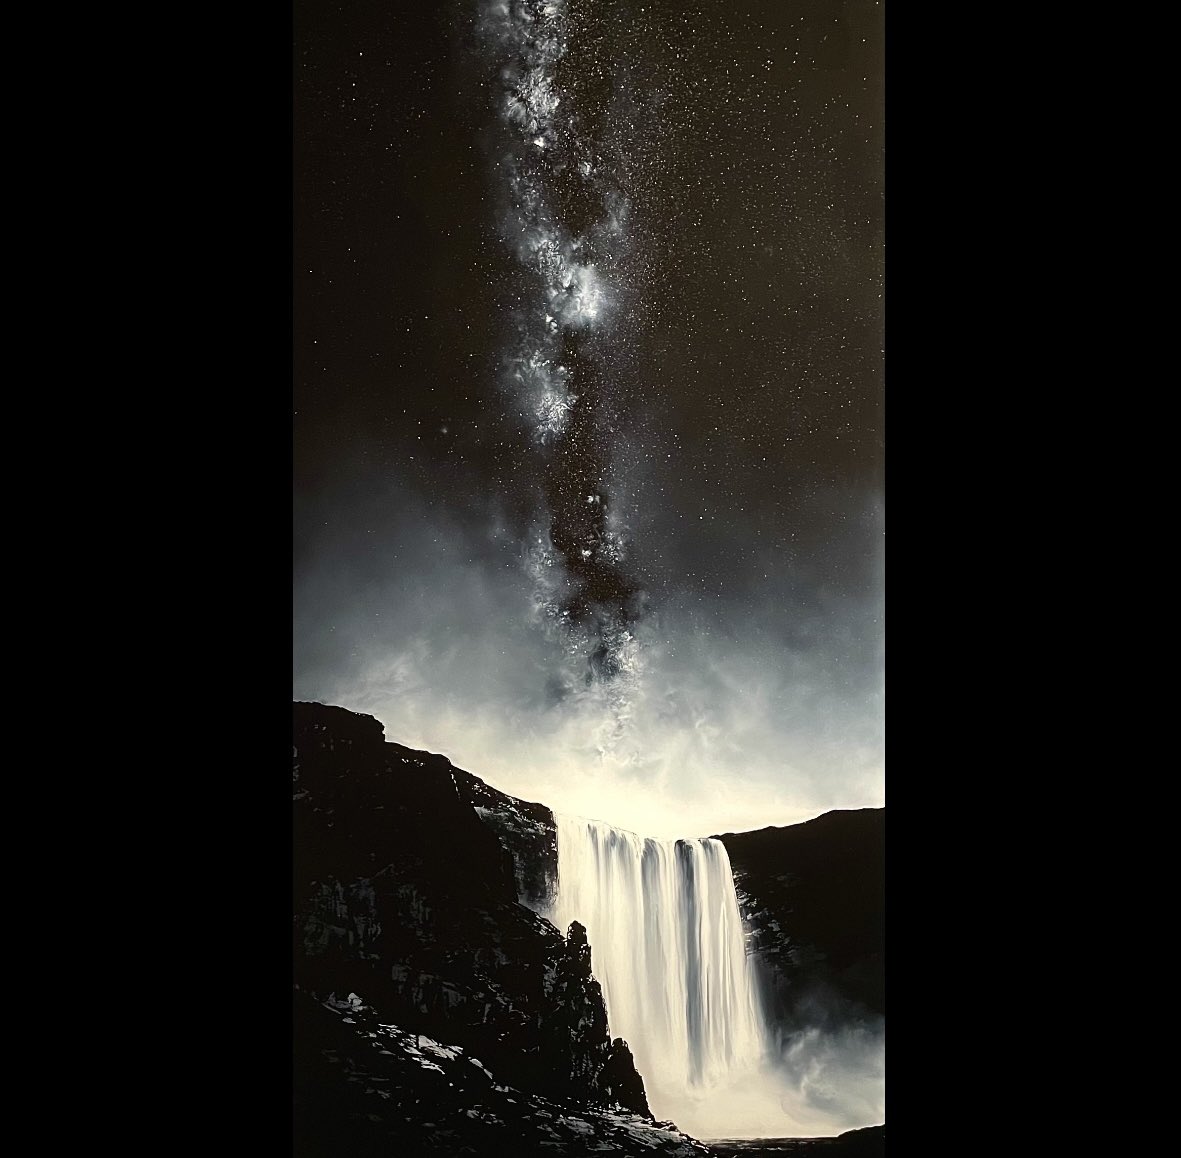 The new limited edition piece from my infinite collection are now available @castlegalleries #castlefineart #oilpainting #landscapeart #art #limitededition #reverseglasspainting #blackandwhite #newrelease #outnow #latestrelease #milkyway #stars #silverriver #infinite #monochrome